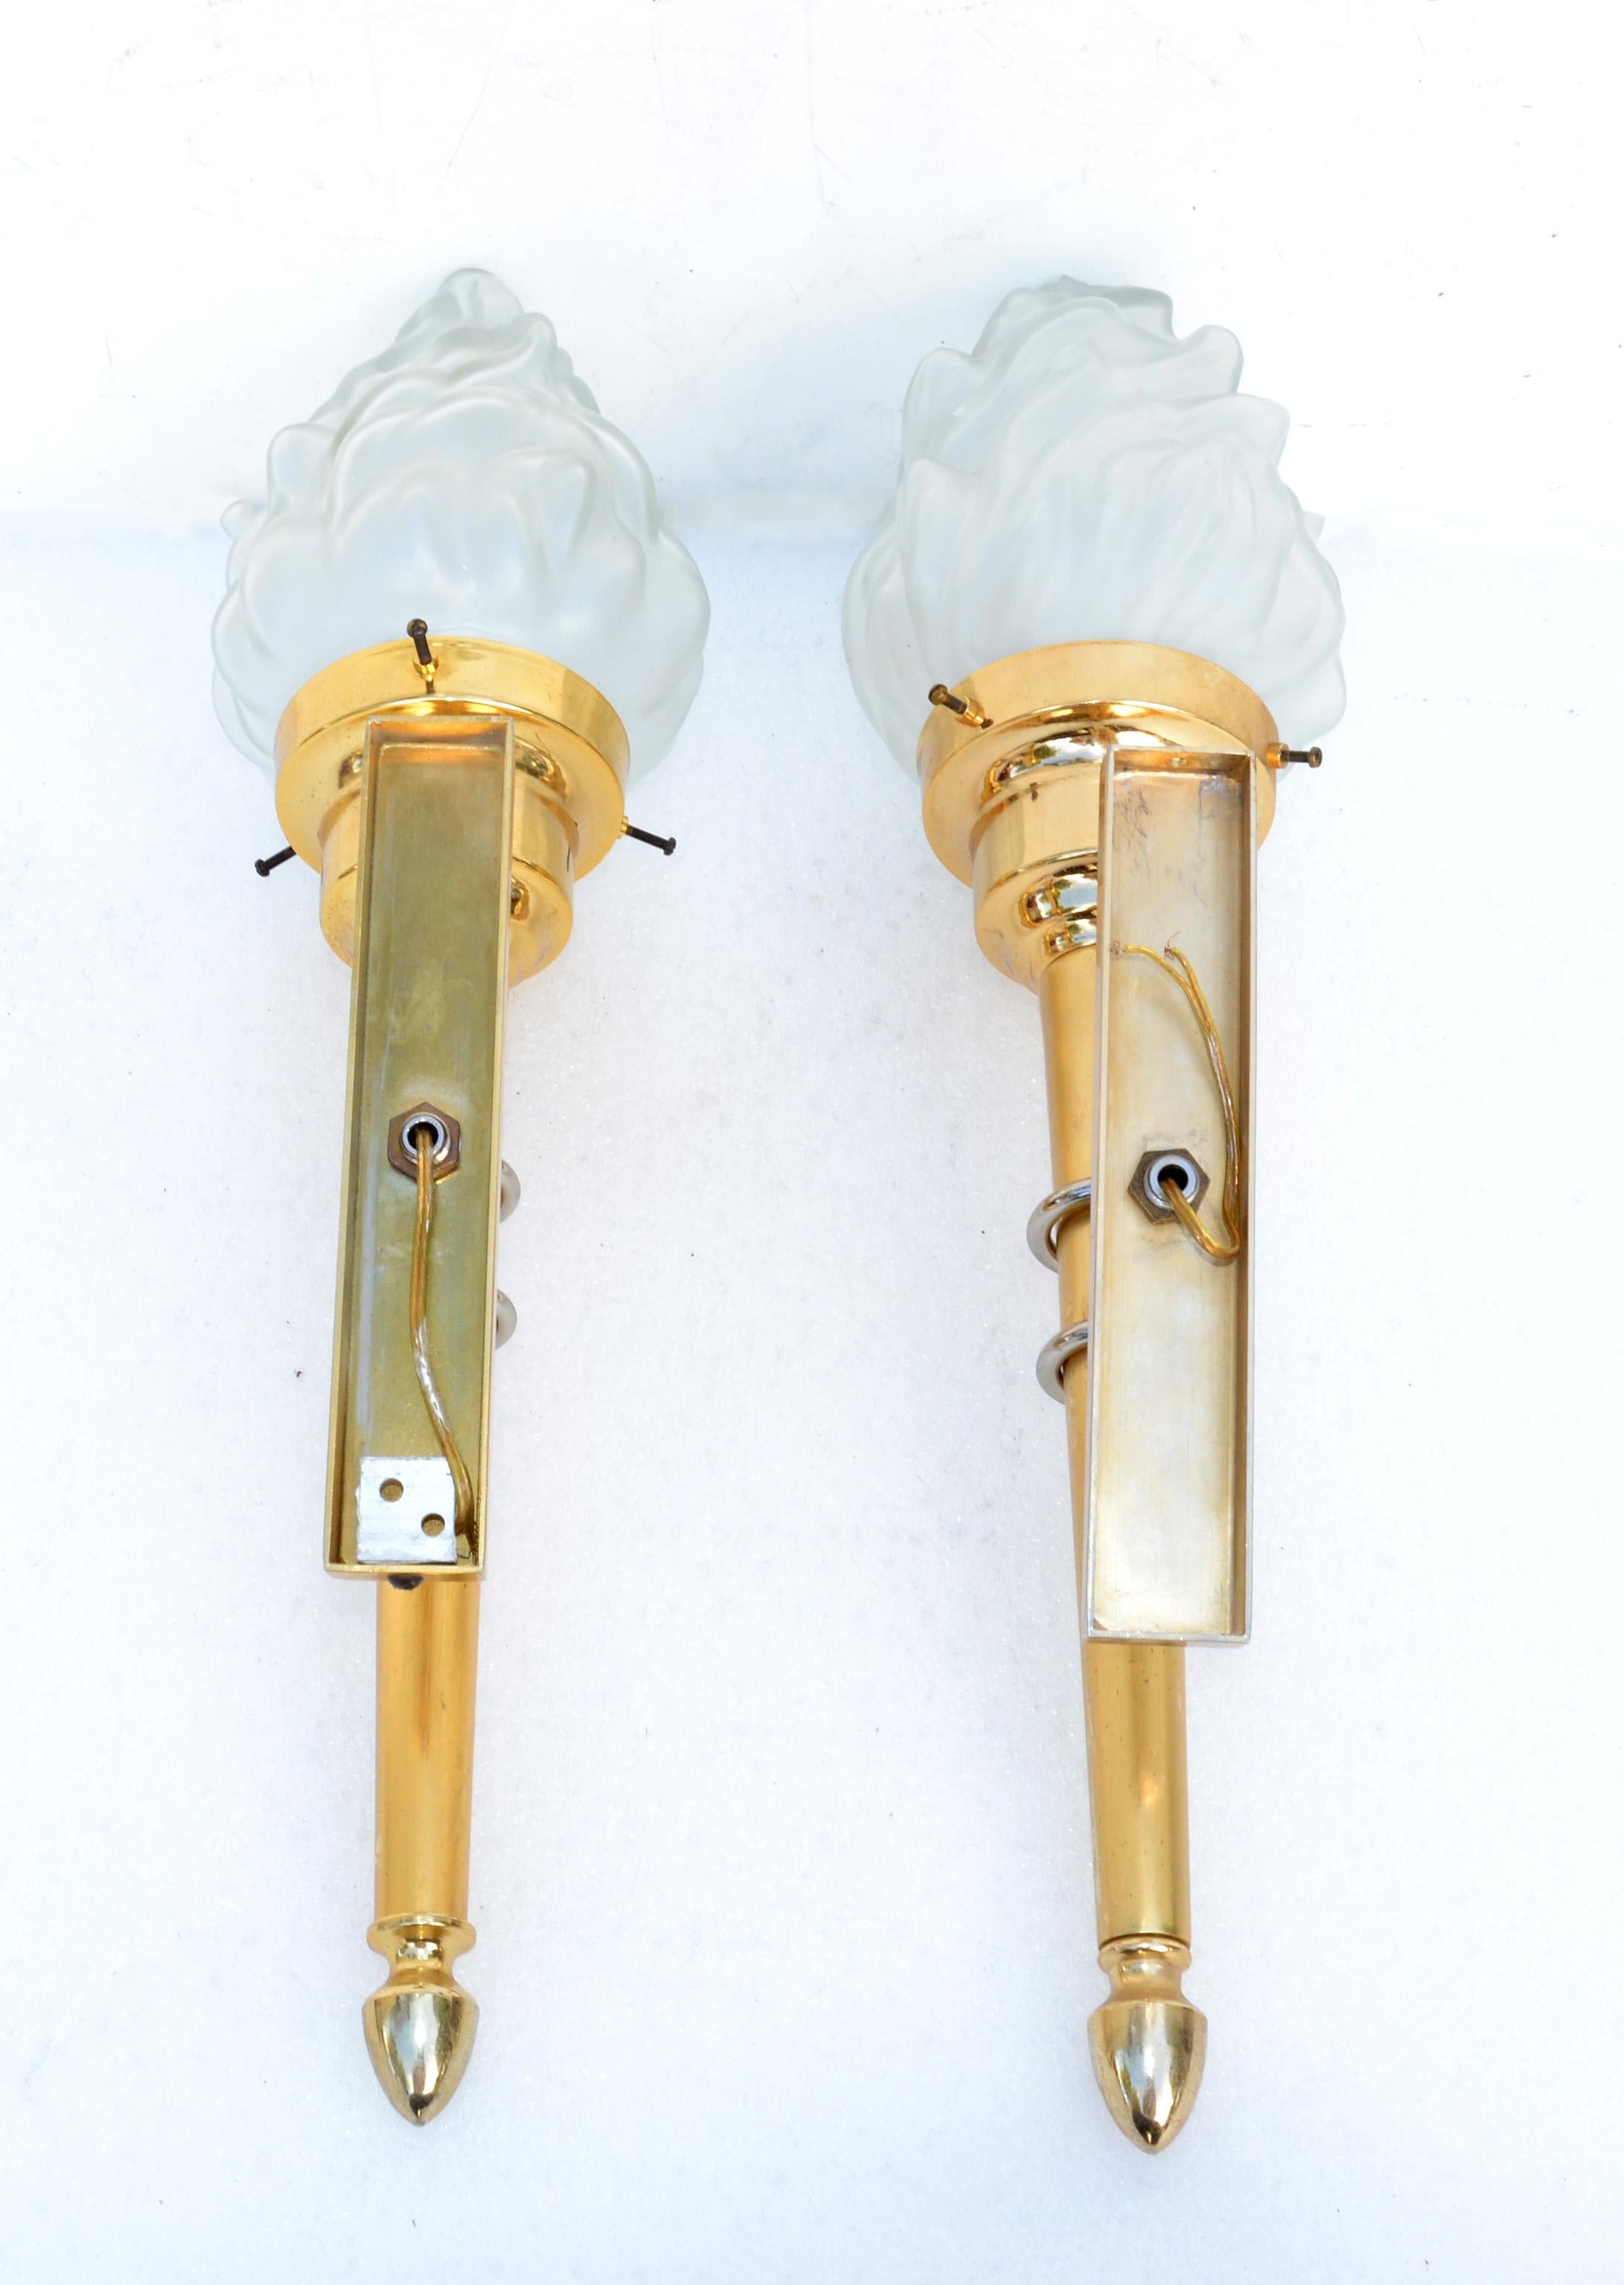 Maison Jansen Style Sconces Brass & Blown Glass Flame Shade France 1950, Pair For Sale 4